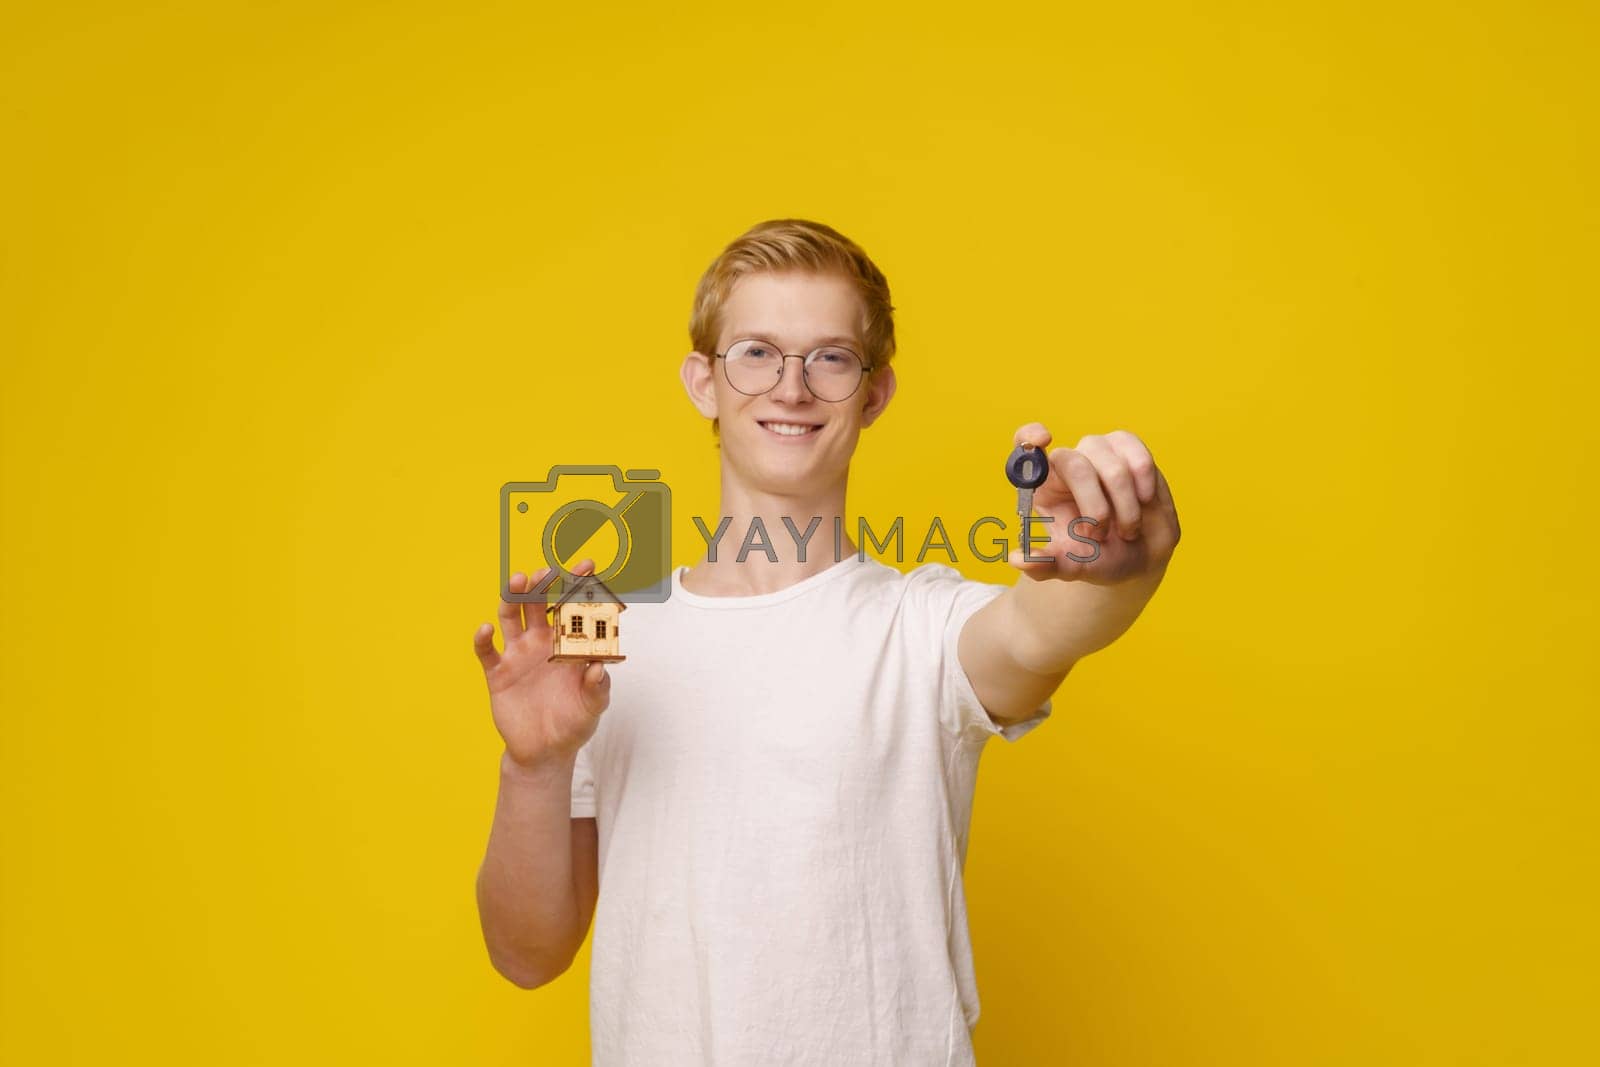 Royalty free image of Young man stands against vibrant yellow background, holding set of keys and model house, symbolizing home ownership and the real estate industry. Focus on hand with key. by LipikStockMedia